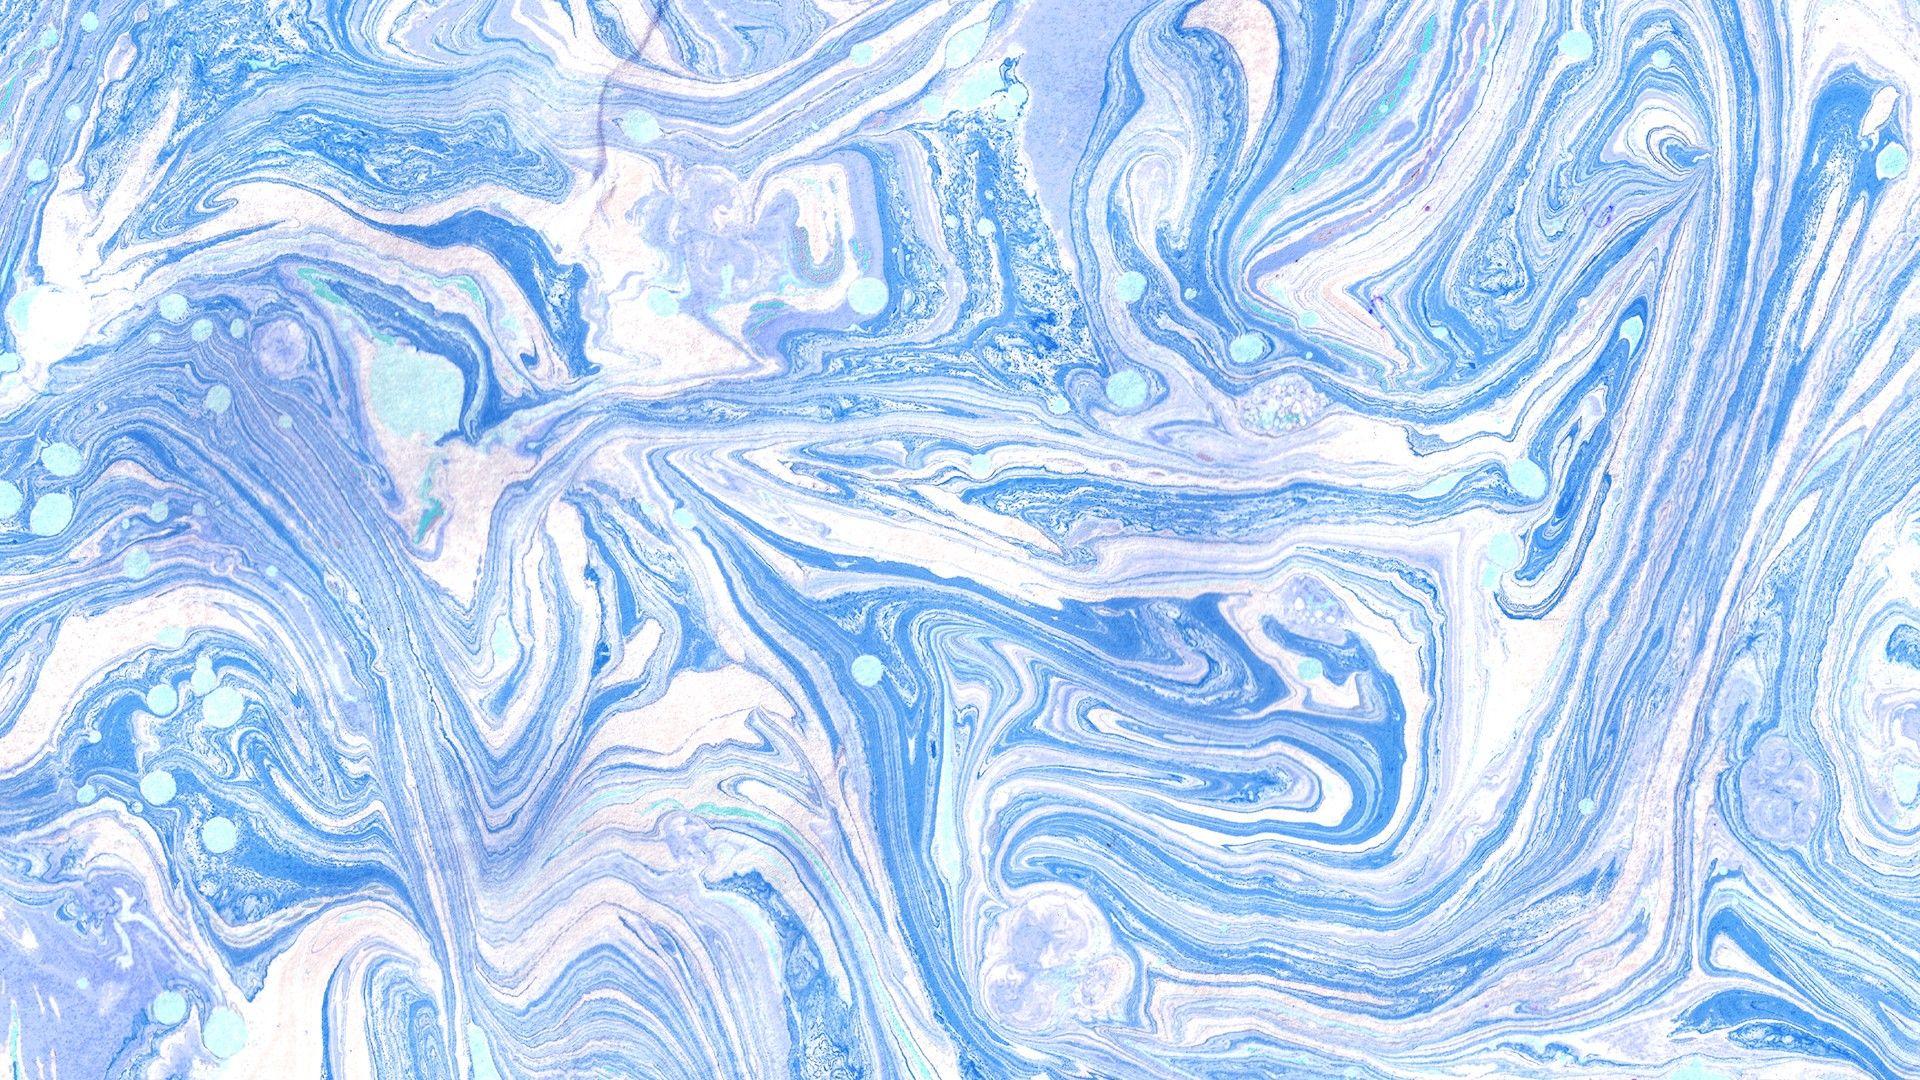 Blue and Gold Marble Laptop Wallpaper Free Blue and Gold Marble Laptop Background